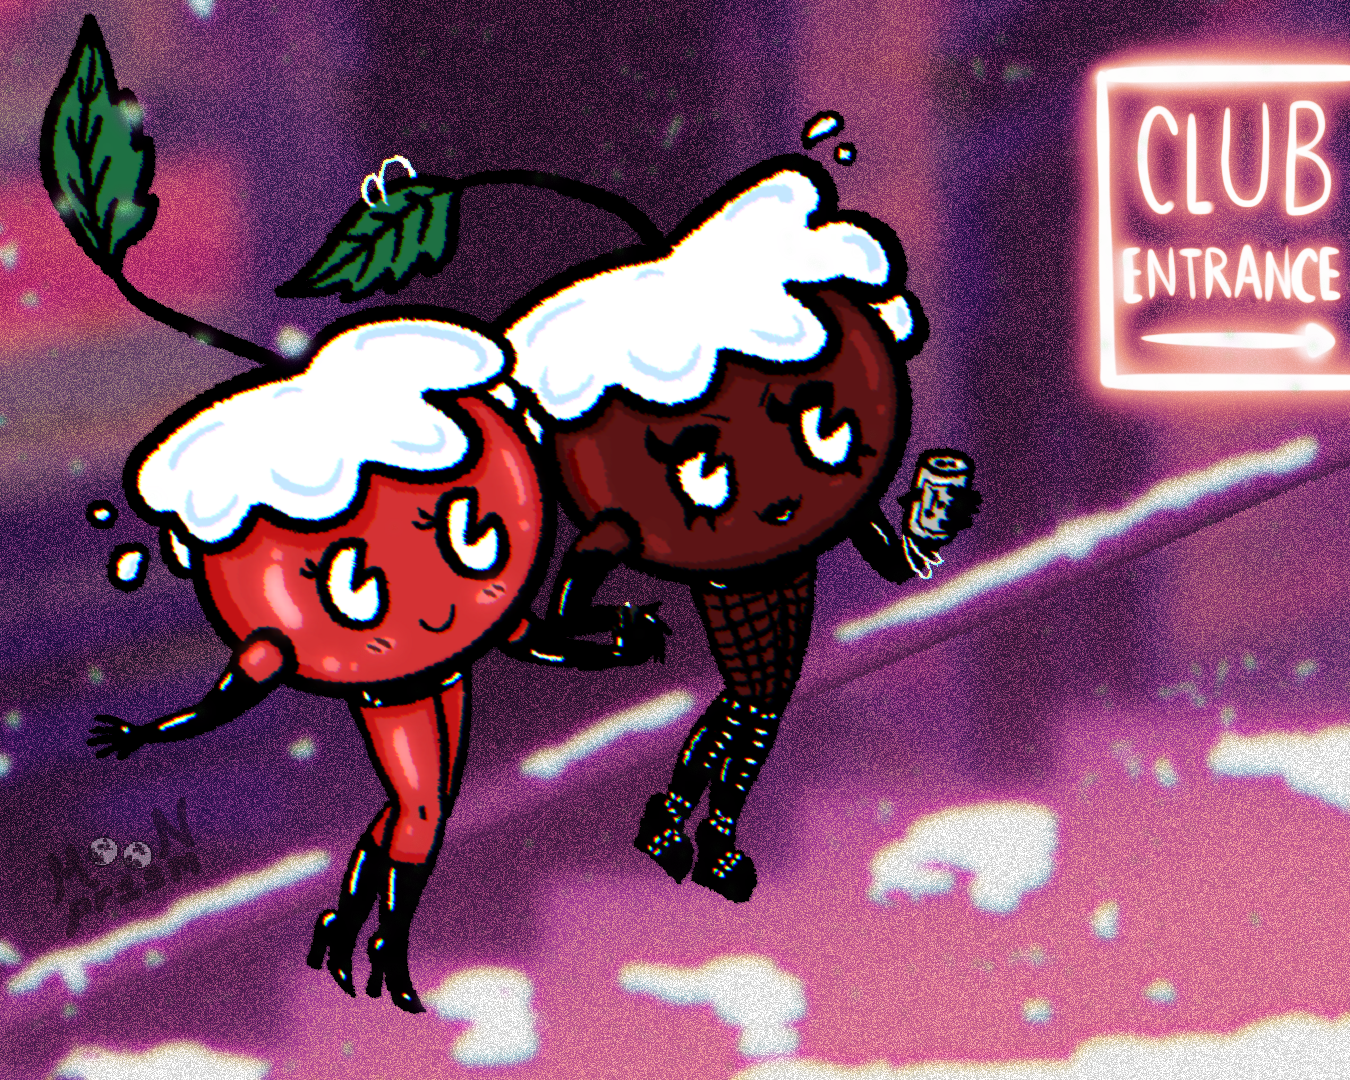 An illustration of two anthropomorphic cherry women dressed in leather outfits. They are holding hands and headed up the stairs towards a night club entrance. There is snow everywhere, but they are happy to be out!